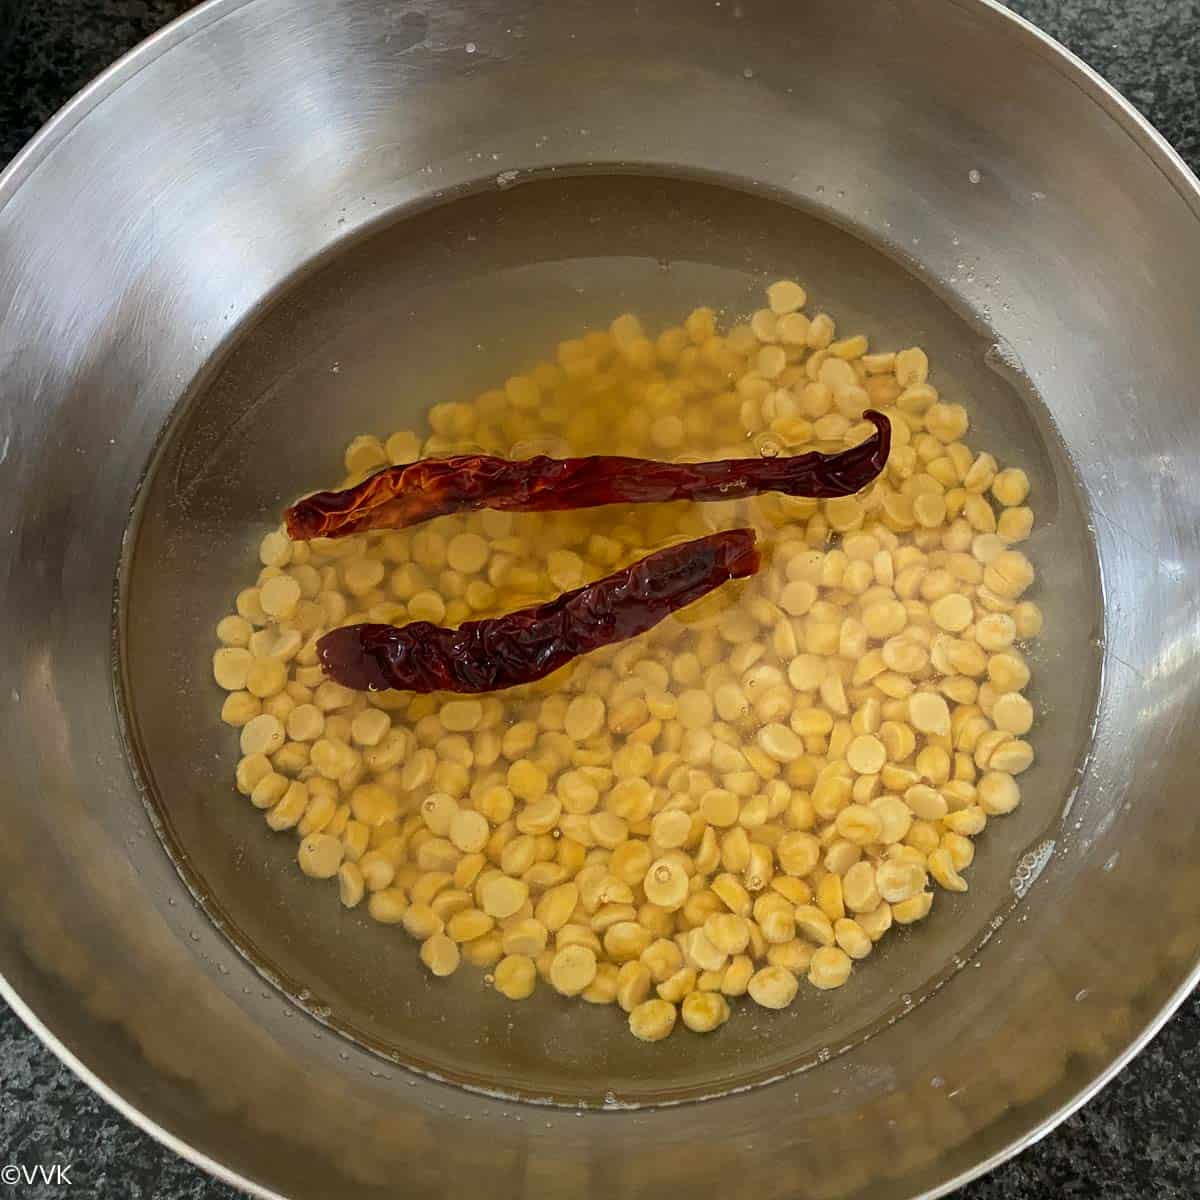 soaking the lentils and chilies for the vadai